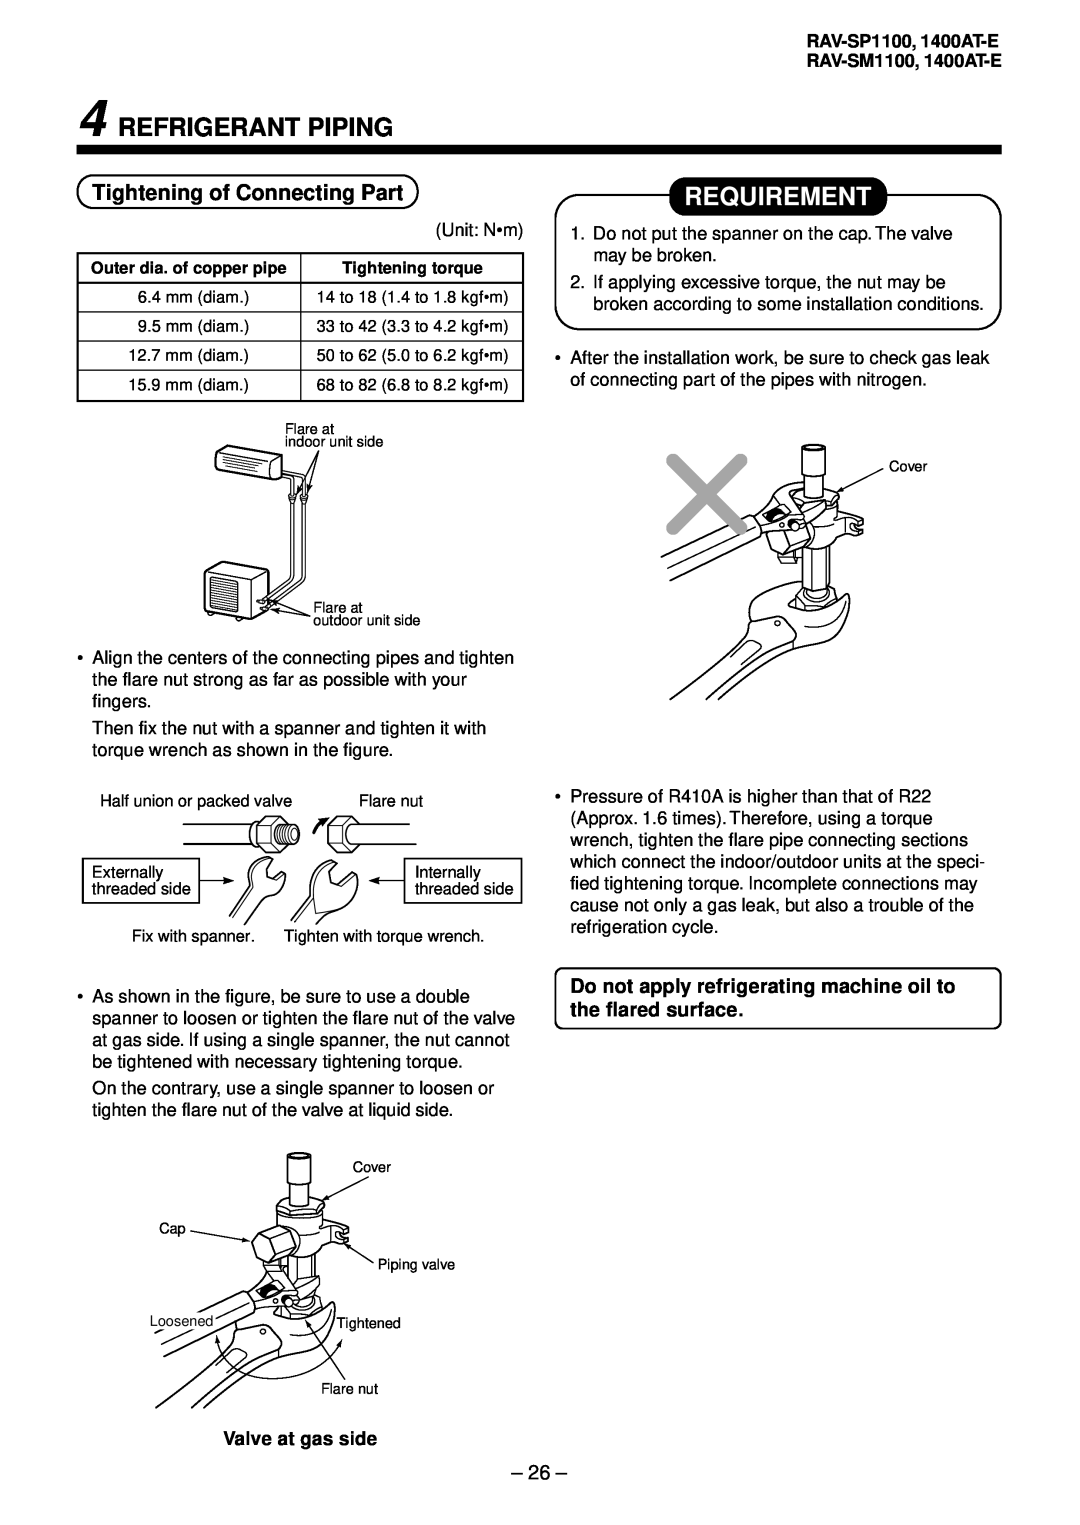 Balcar R410A service manual Refrigerant Piping, Requirement, Tightening of Connecting Part, 26 